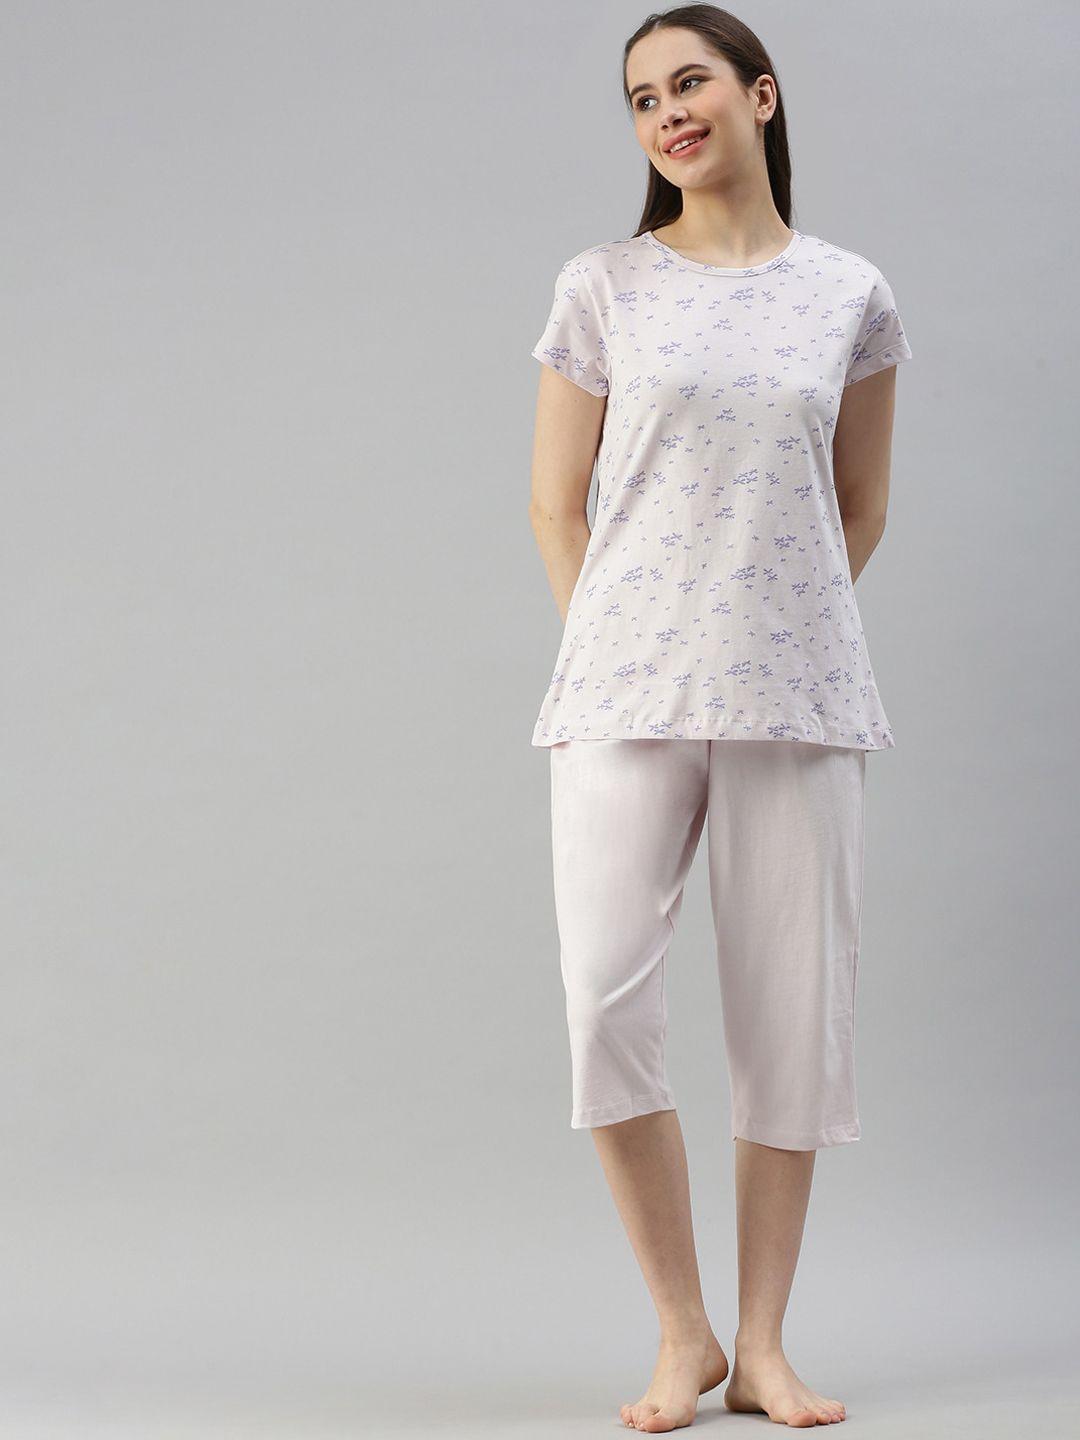 juneberry-floral-printed-pure-cotton-night-suit